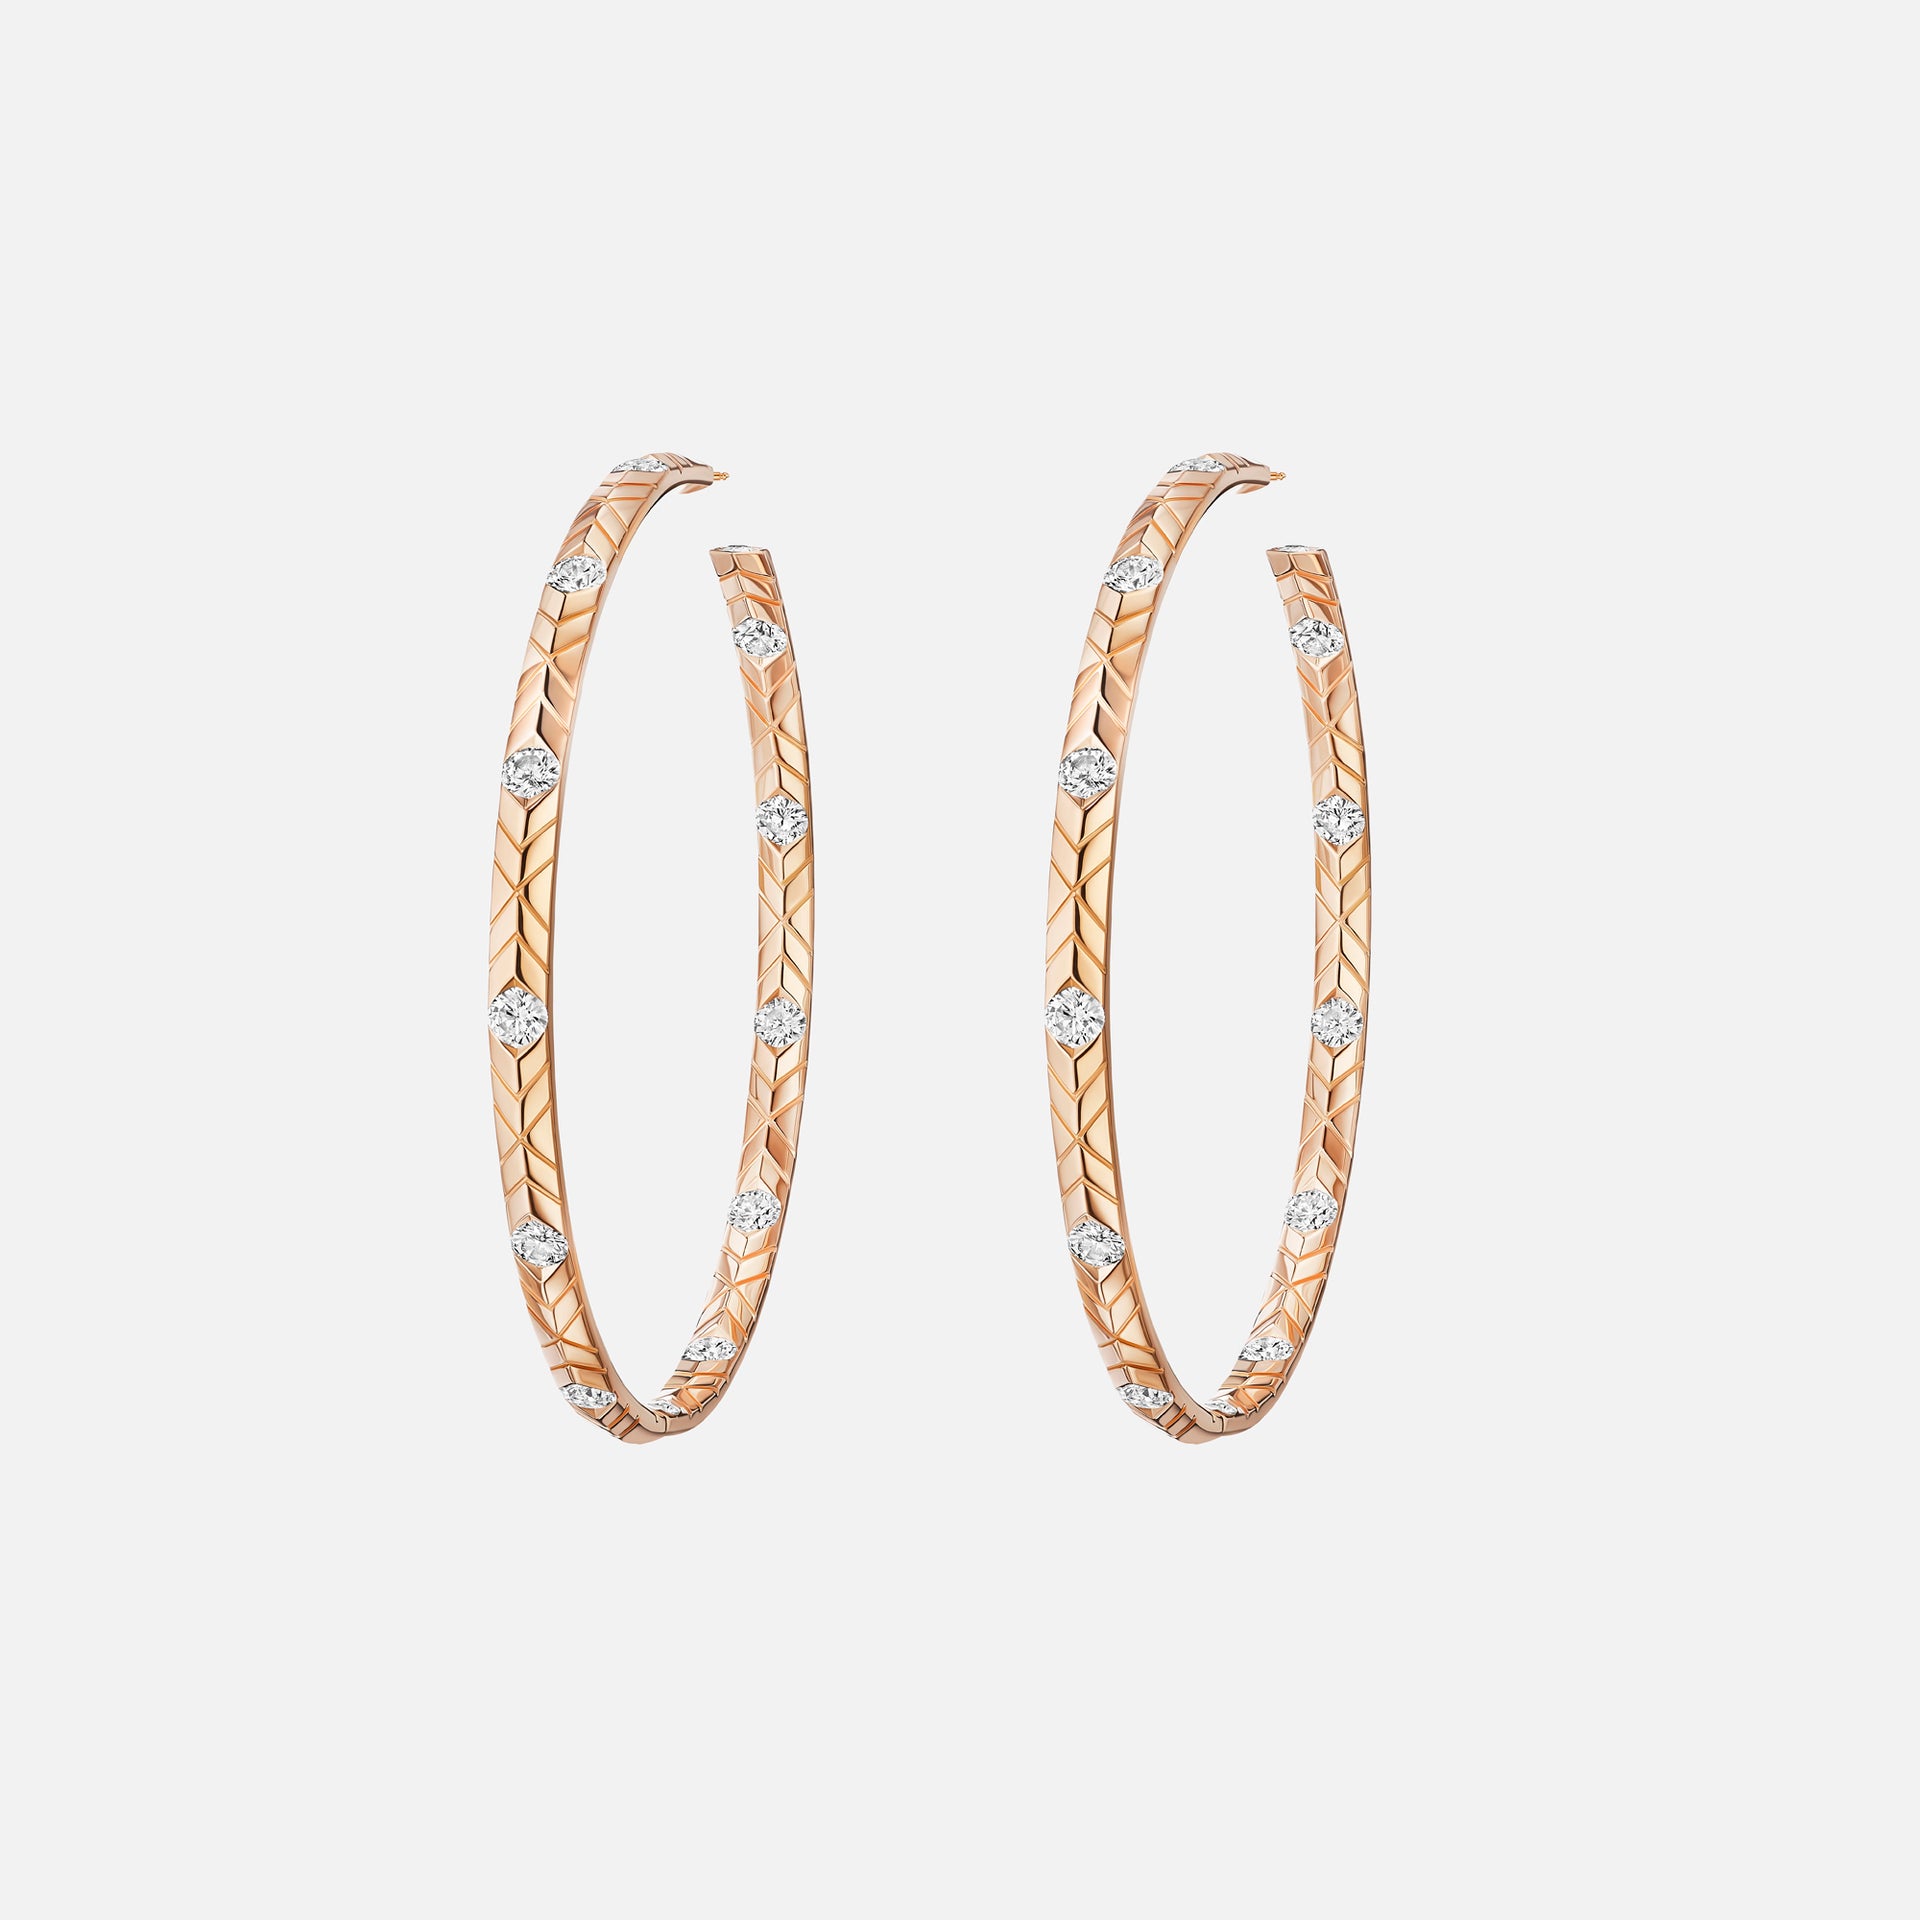 VL Cepher Skeiling Large Earrings With 26 Diamonds - Rose Gold